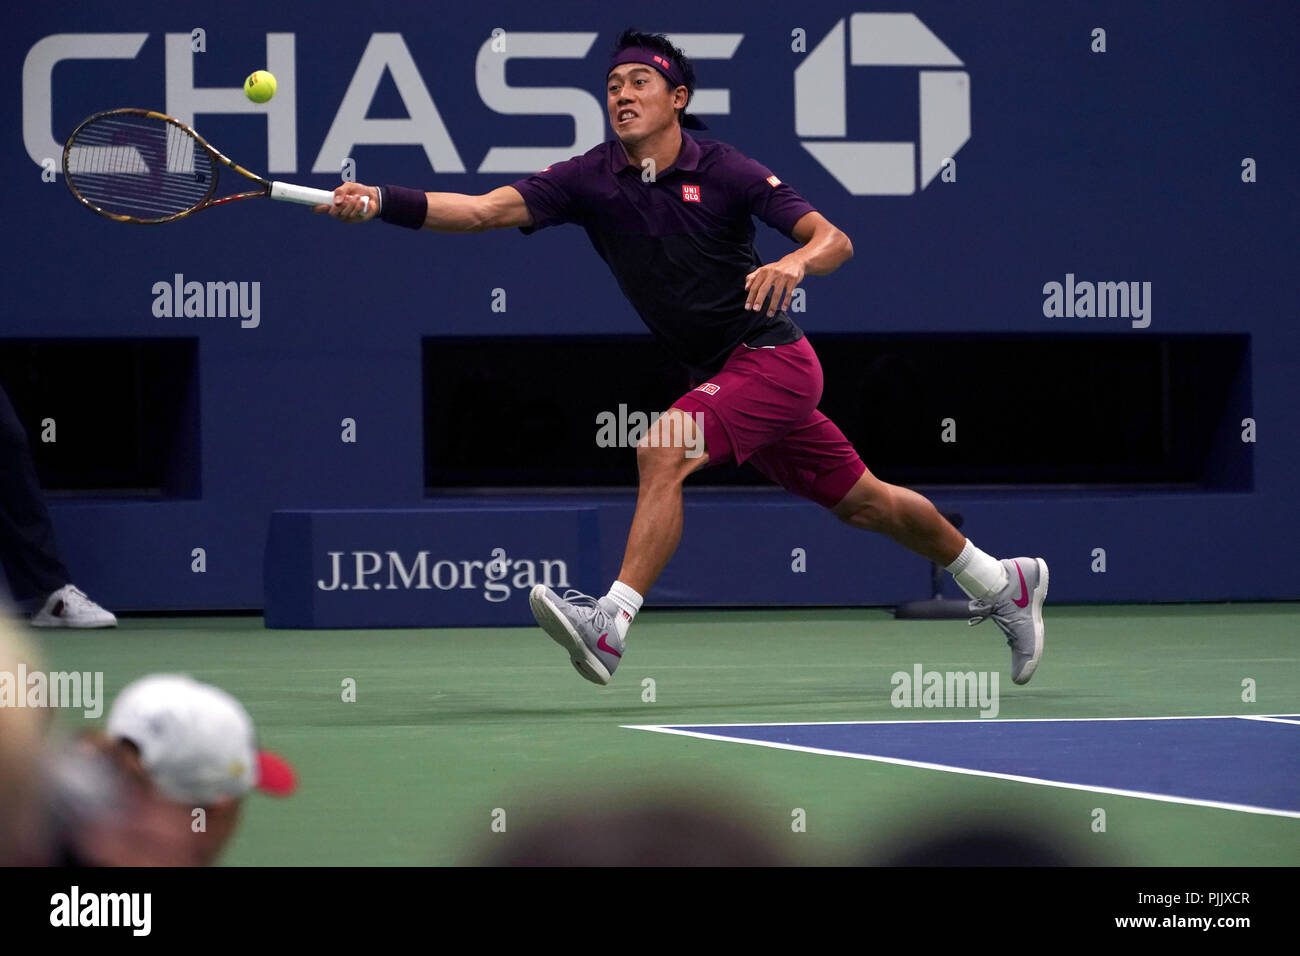 New York, USA. 7th September 2018.  US Open Tennis:  Japan's Kei Nishikori in action against Novak Djokovic, during their semifinal match at the US Open in Flushing Meadows, New York. Djokovic won the match and will face Juan Martin del Potro of Argentina in Sunday's final. Credit: Adam Stoltman/Alamy Live News Stock Photo